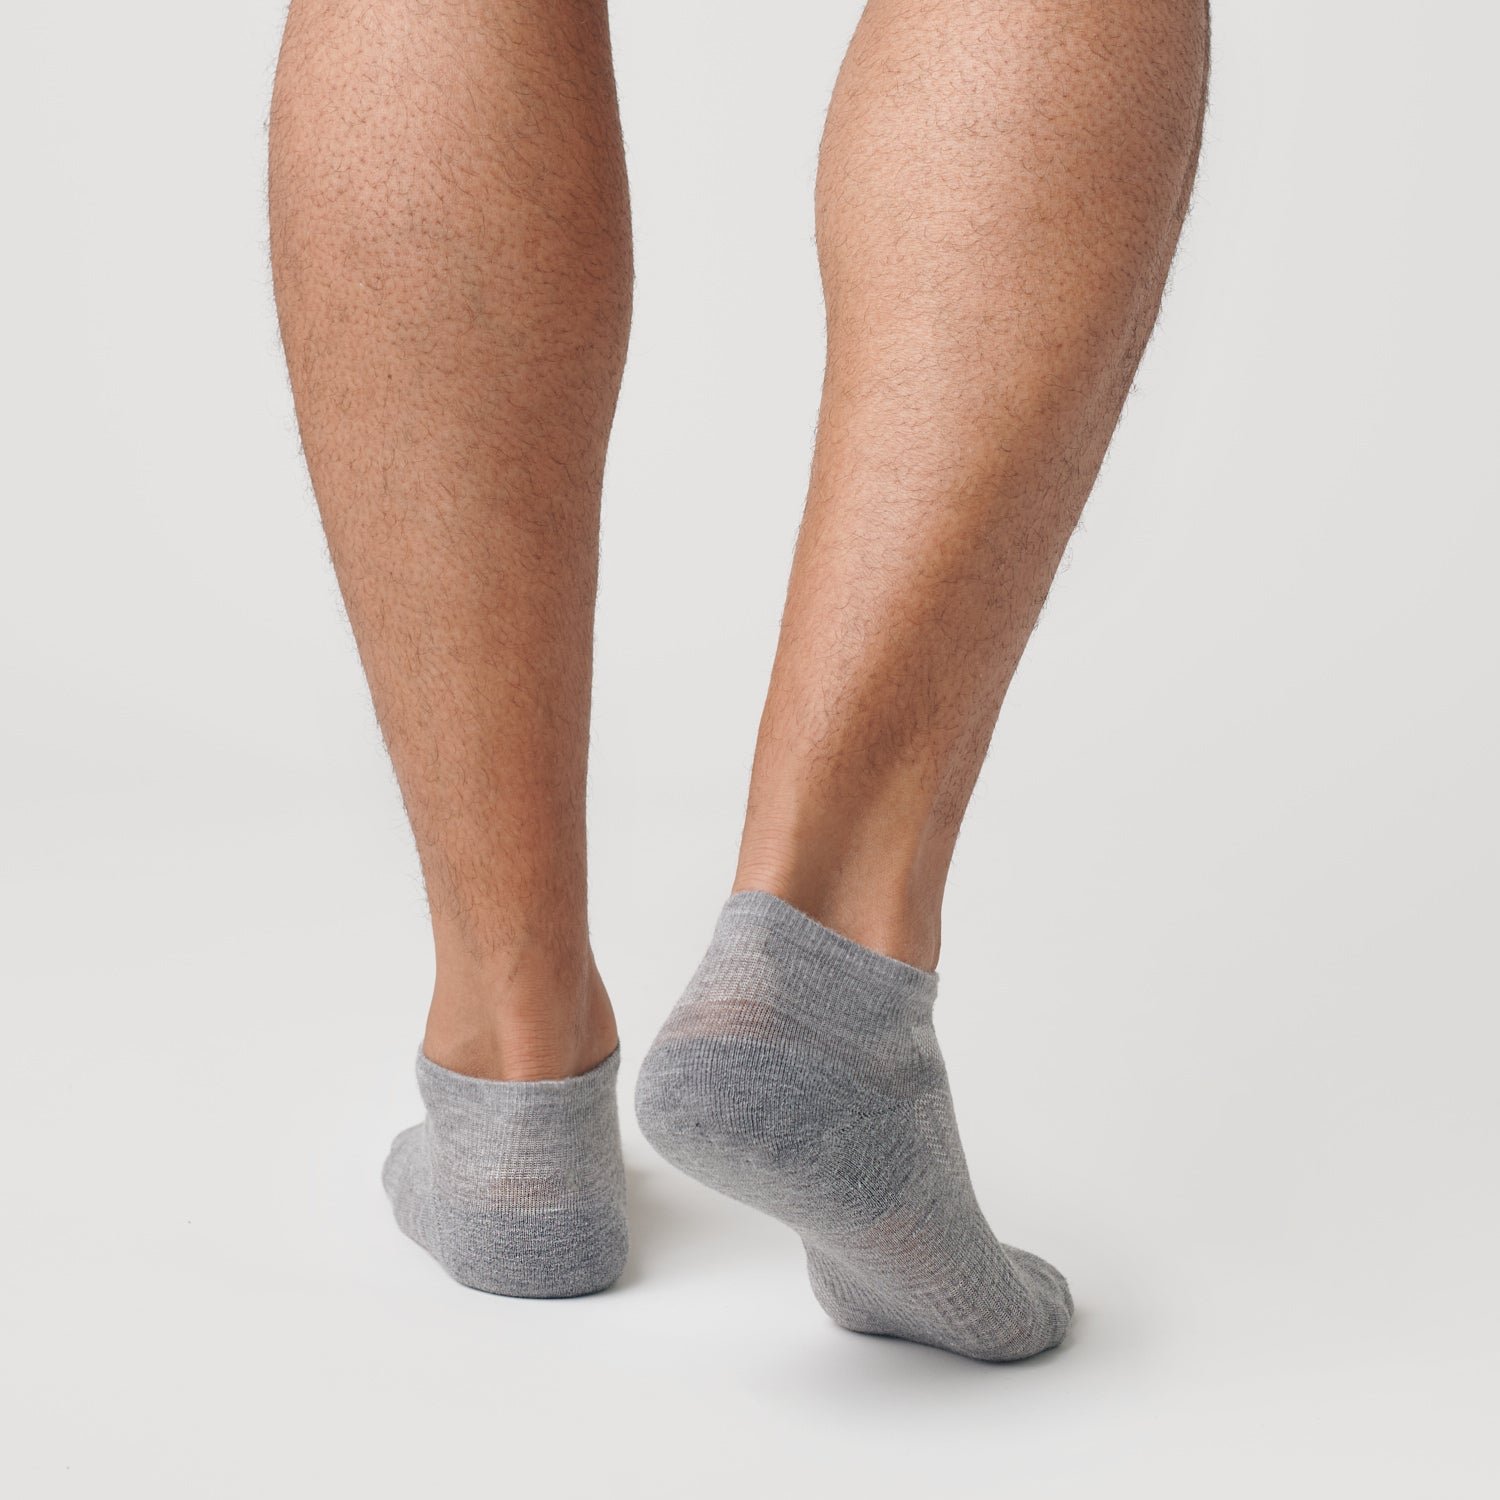 Heather Gray Ankle Sock 6-Pack